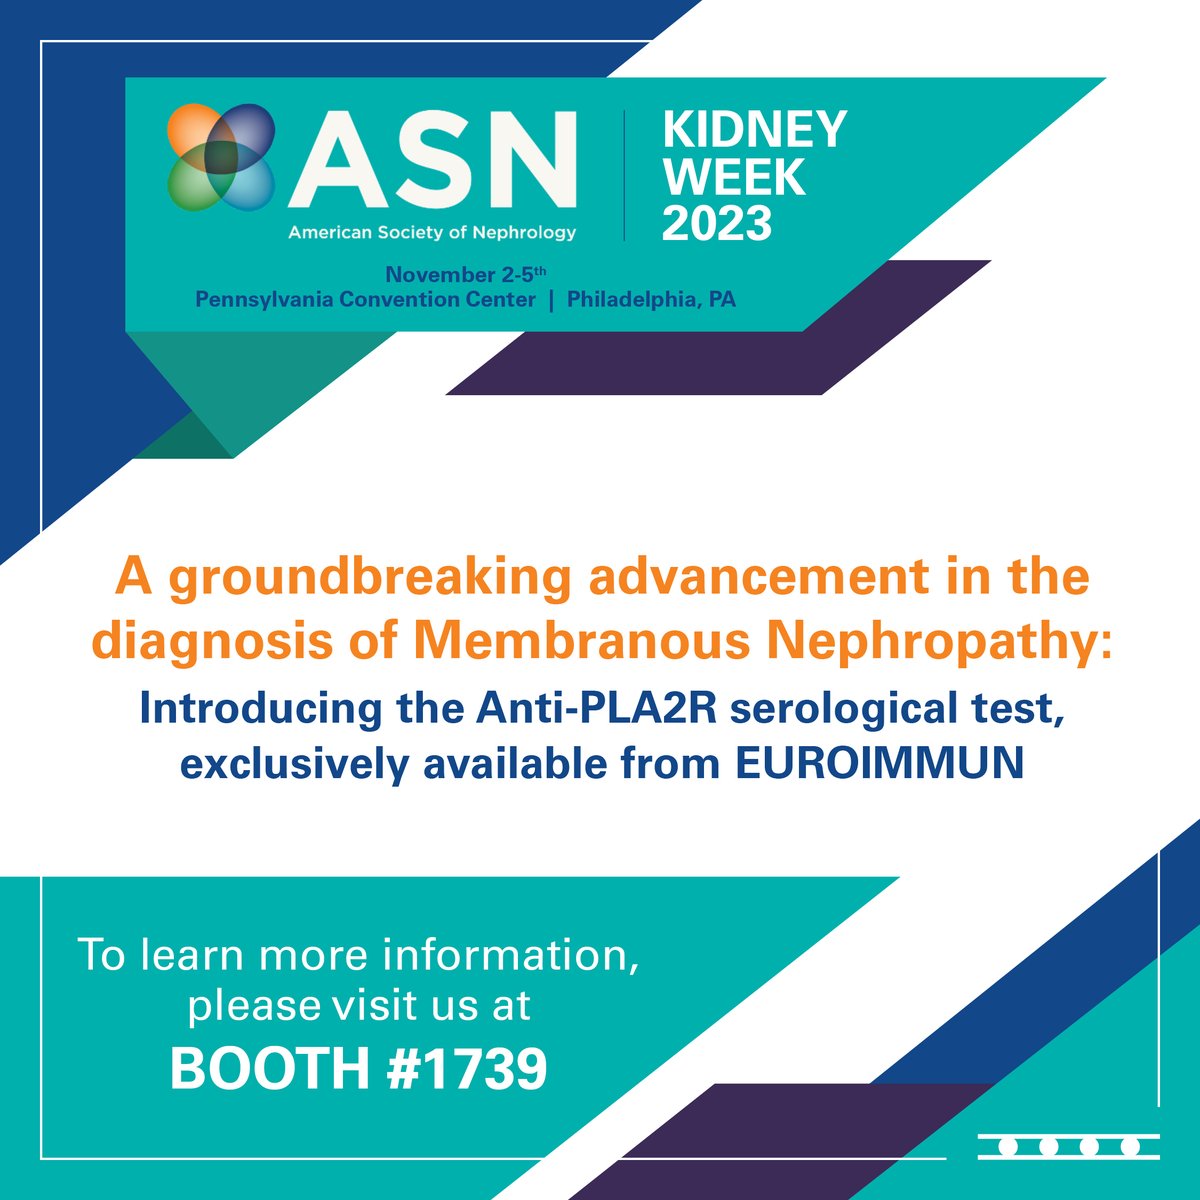 Exciting news! Catch us at ASN Kidney Week in Philadelphia, Nov 2nd-5th. Join us at booth# 1739 to learn more about how this advancement impacts the world of nephrology.

 #ASNKidneyWeek #InnovationInHealth #EUROIMMUNAtASN